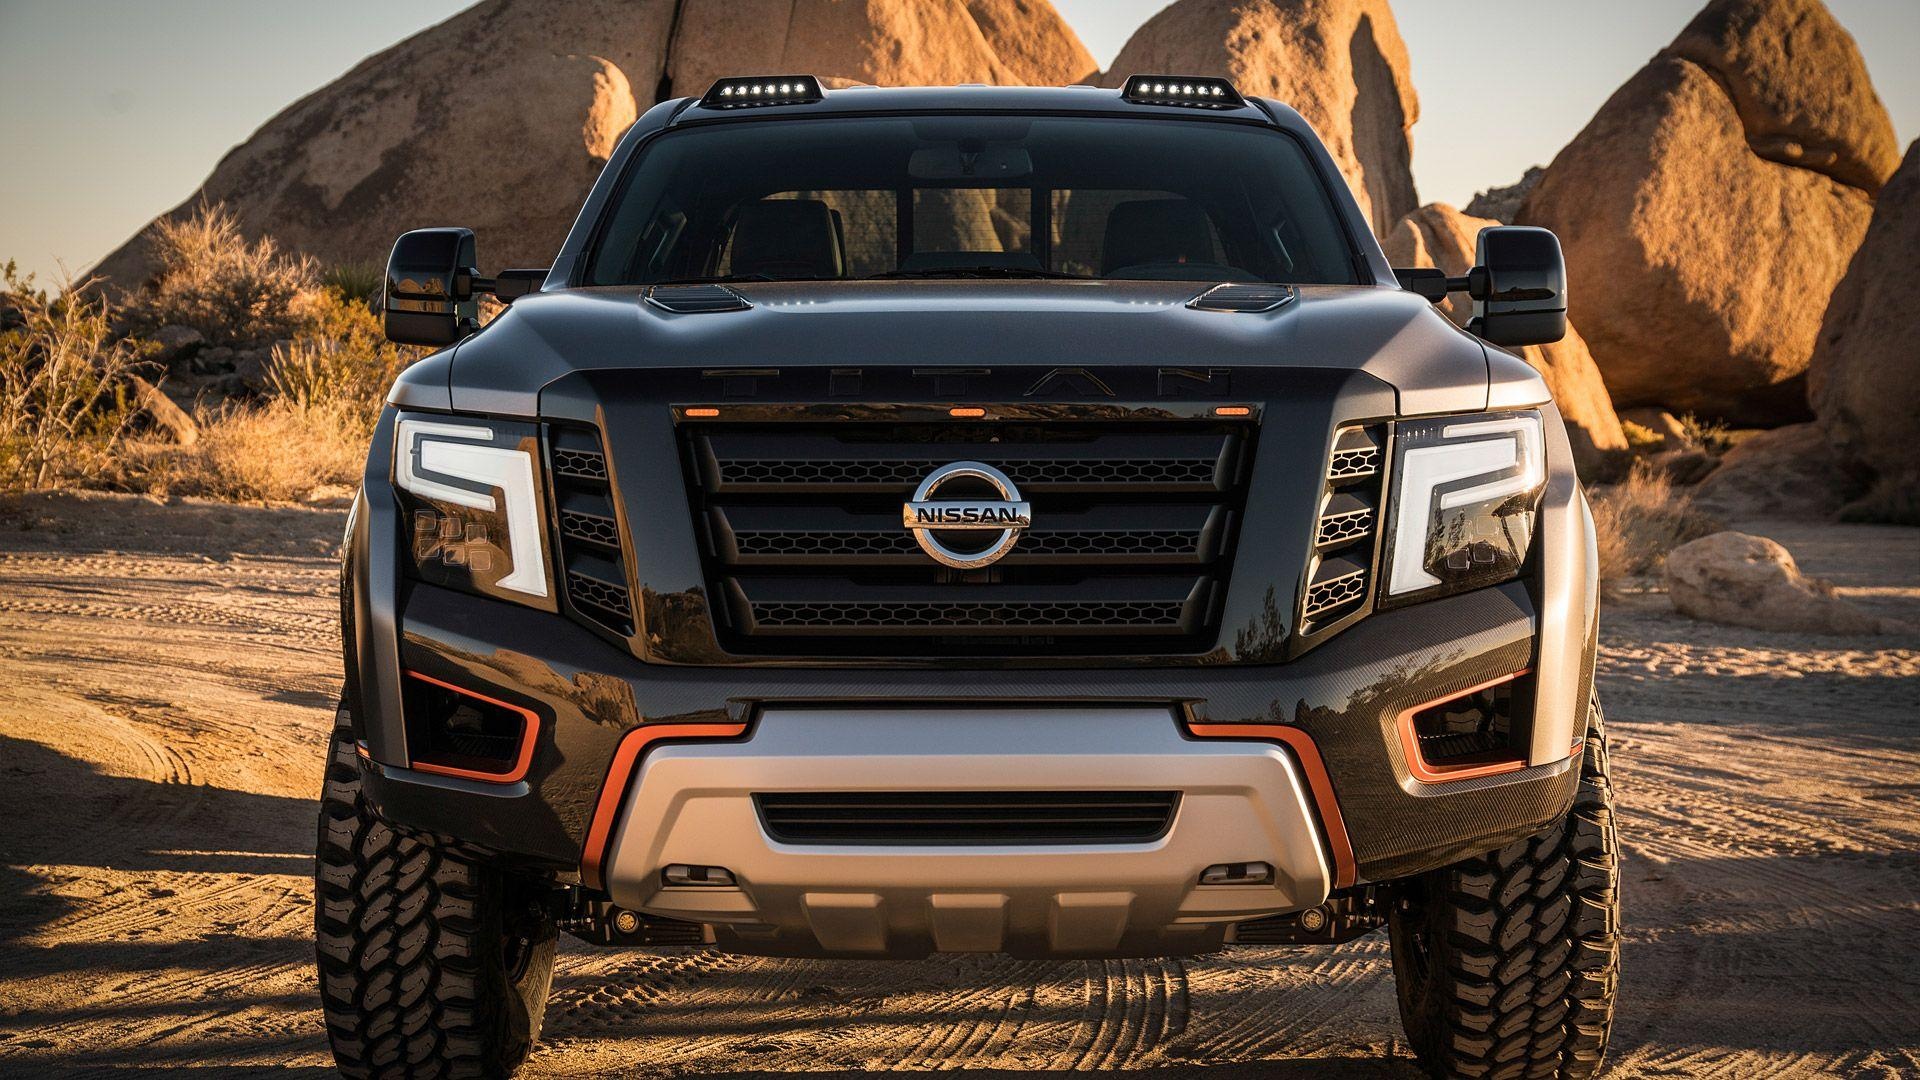 Nissan Titan, High-resolution wallpapers, Top-rated backgrounds, Automotive enthusiasts, 1920x1080 Full HD Desktop